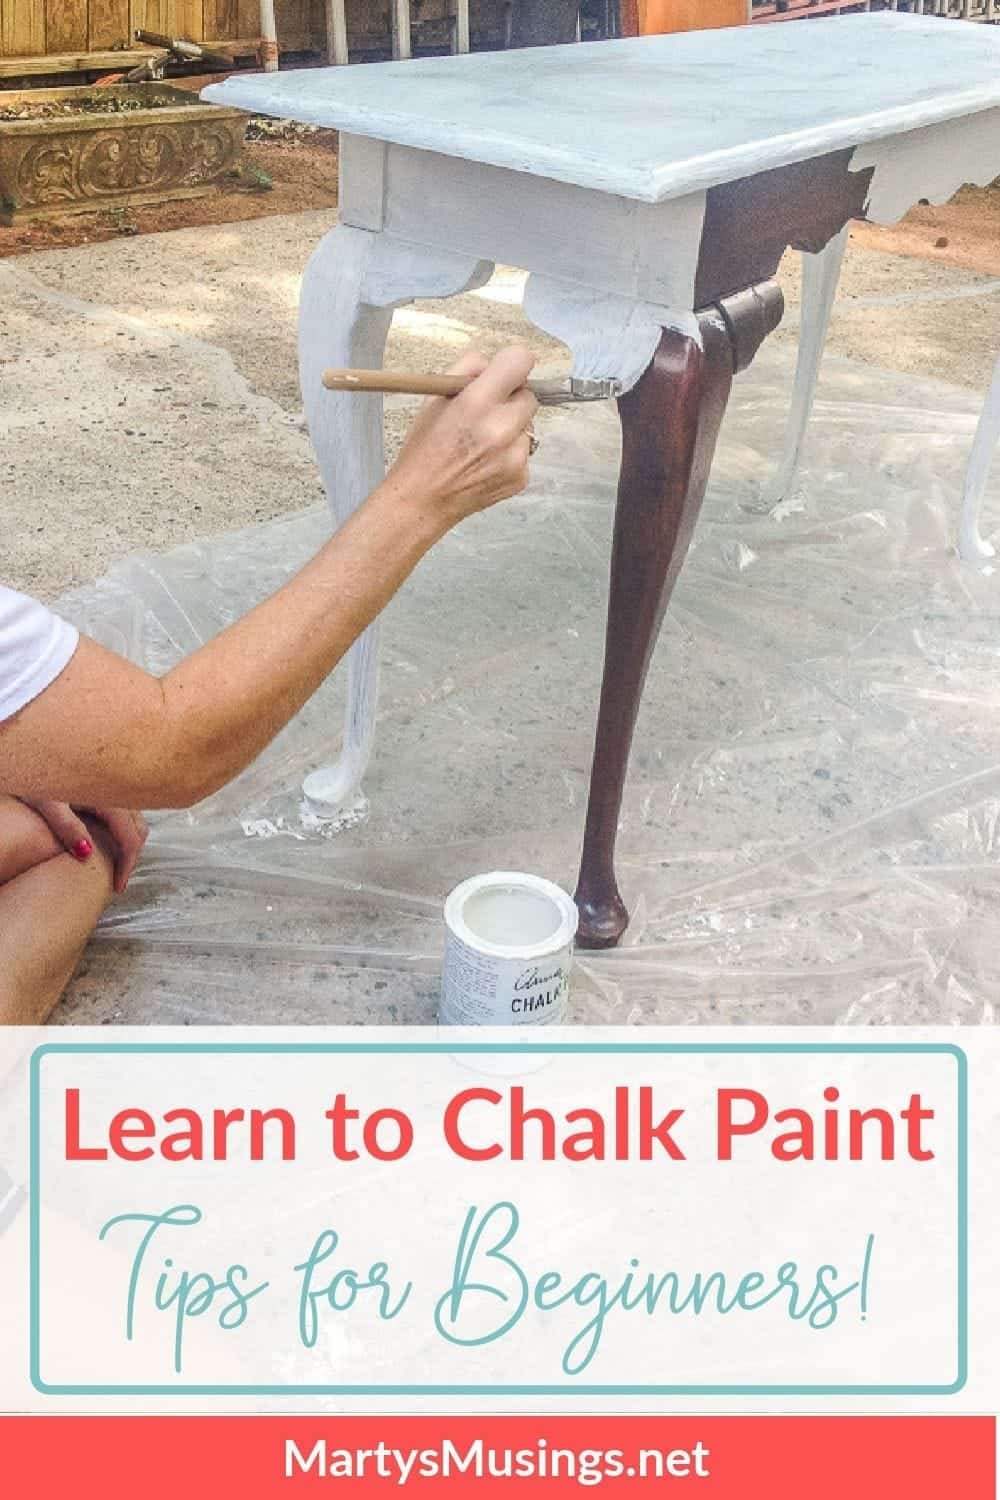 7-chalk-painting-tips-for-beginners-marty-s-musings